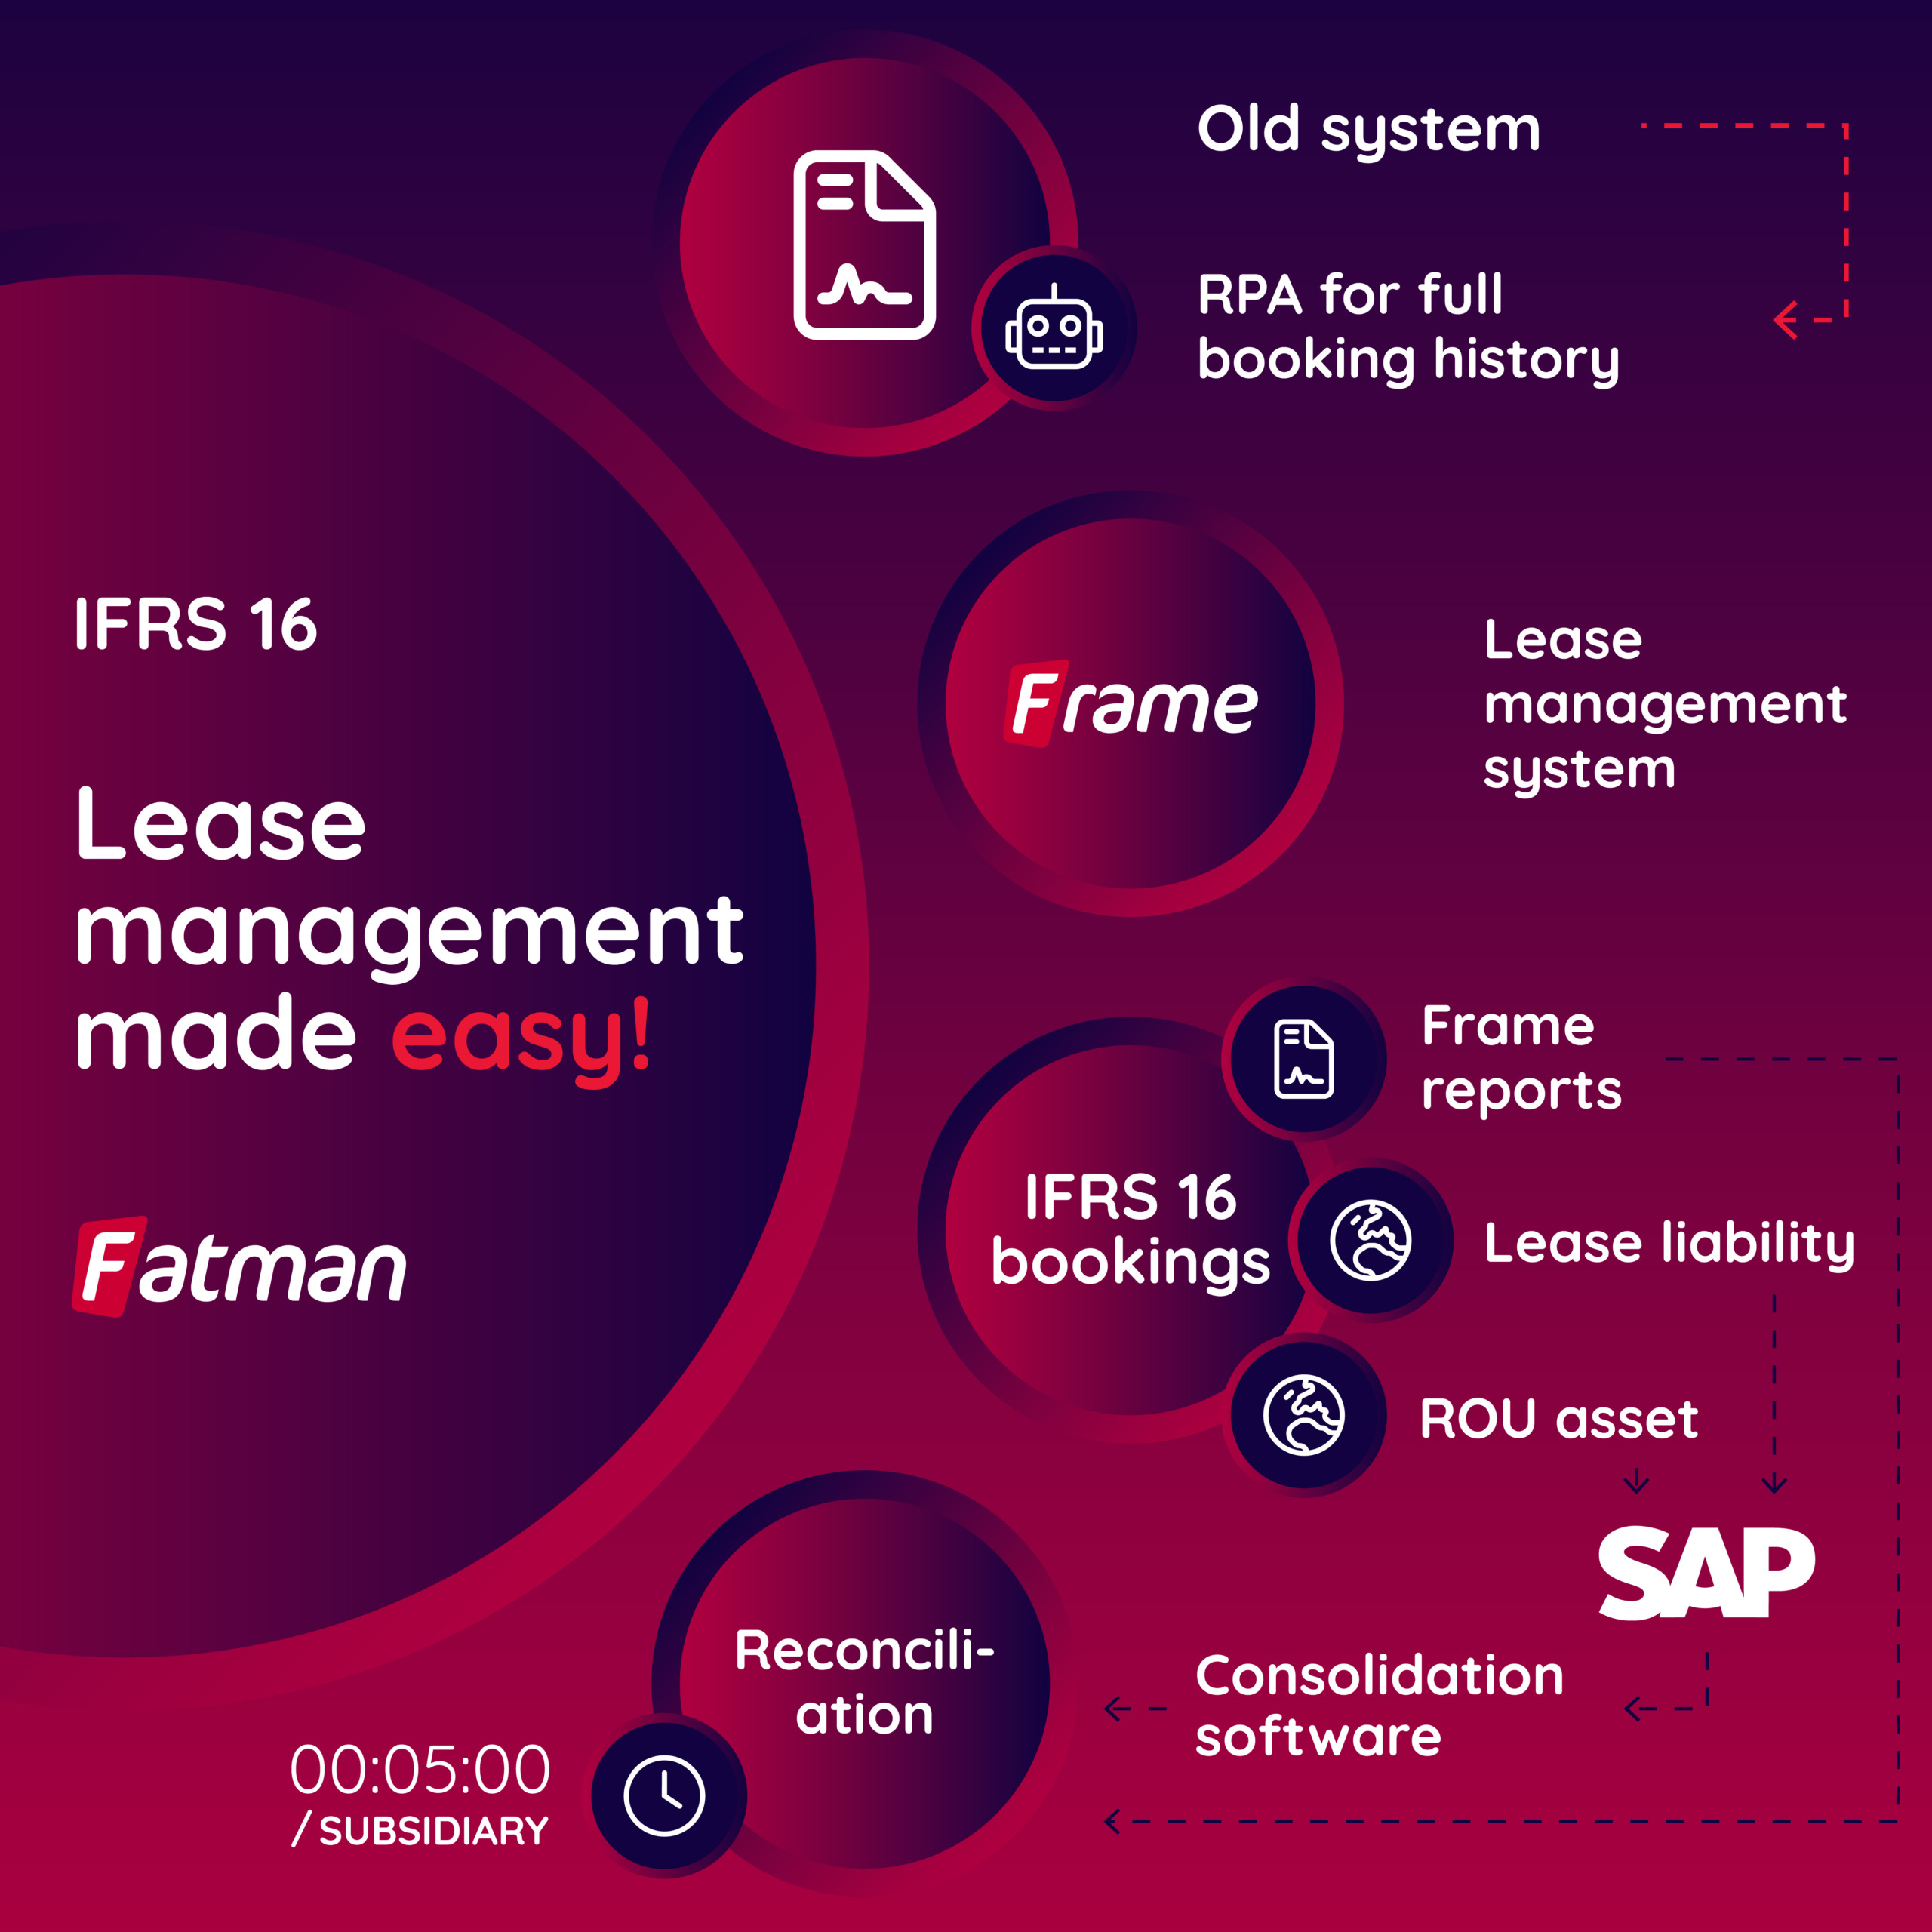 IFRS 16 Lease Management made easy